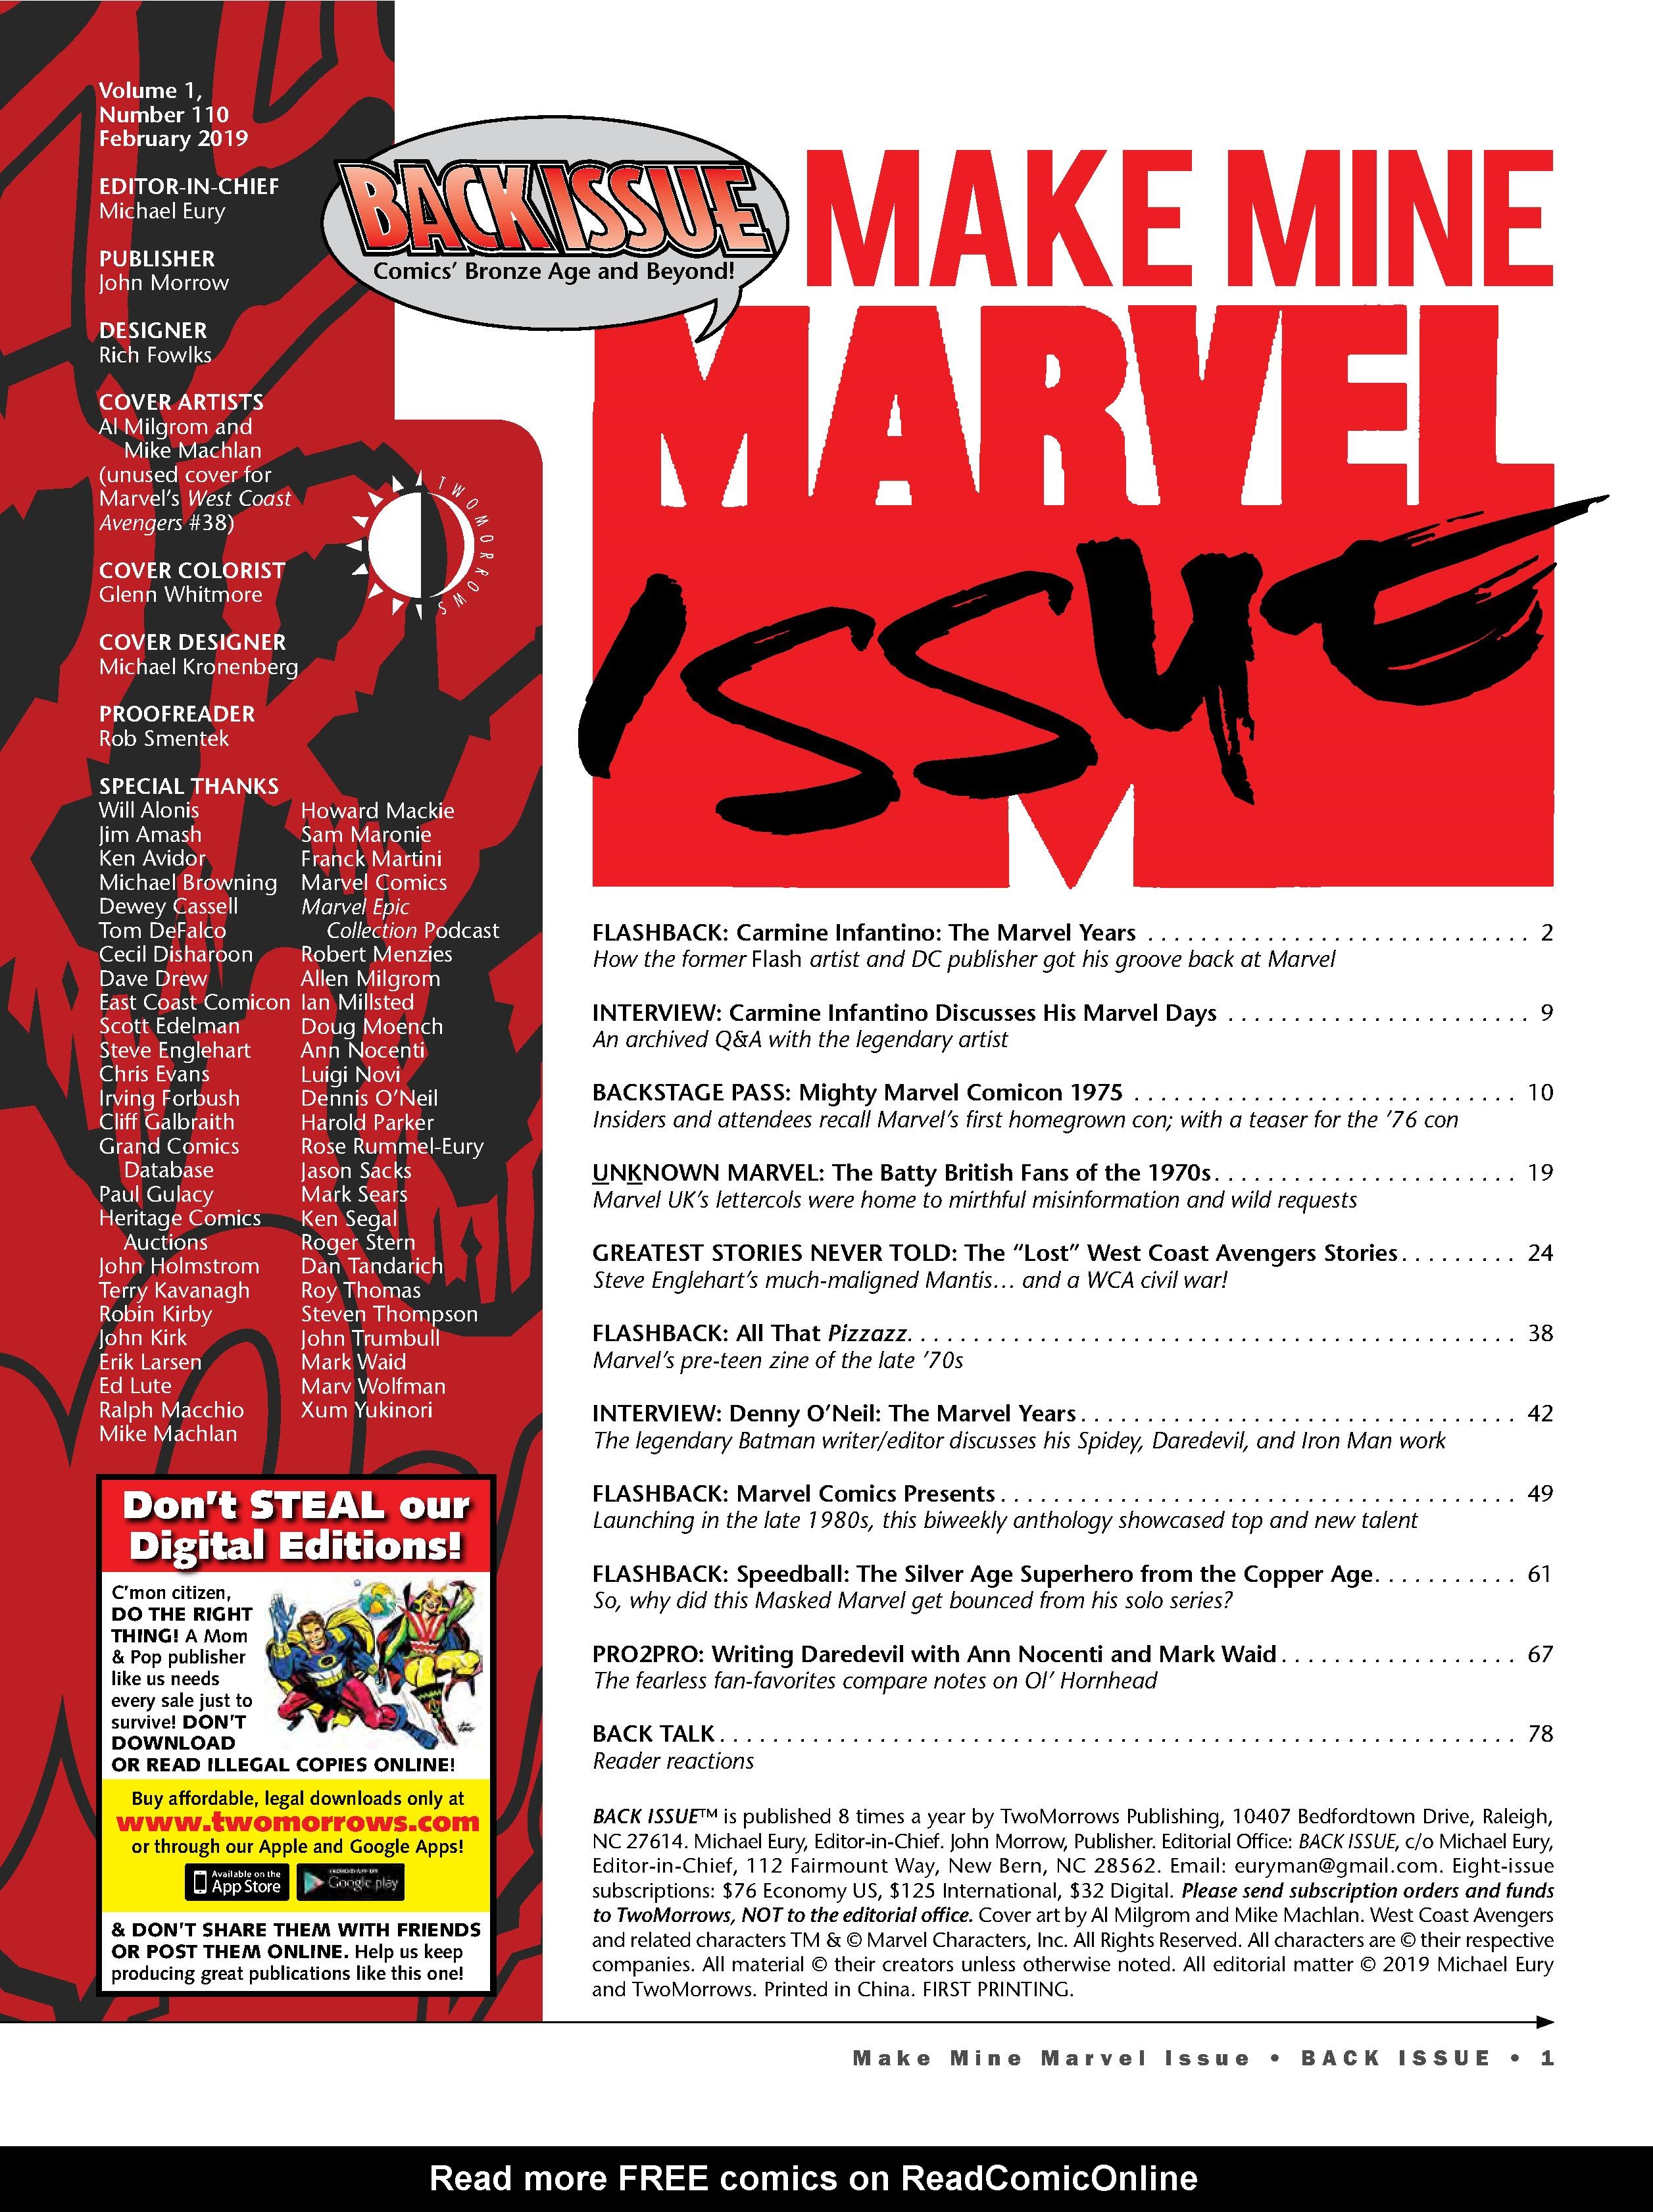 Read online Back Issue comic -  Issue #110 - 3